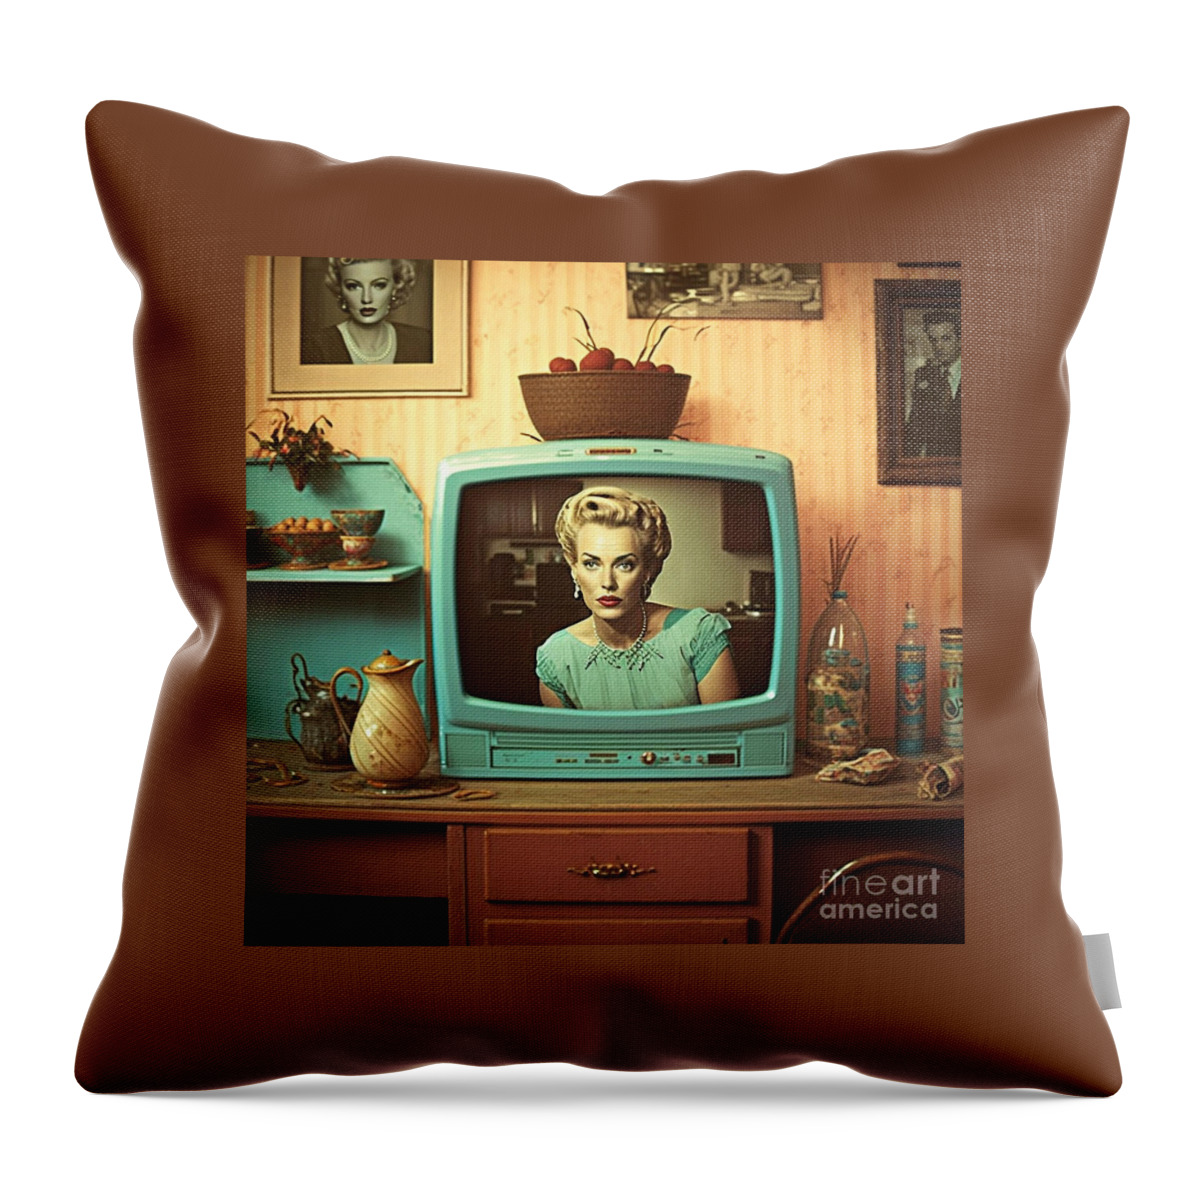 50s Kitsch Throw Pillow featuring the mixed media 50s Kitsch by Jay Schankman